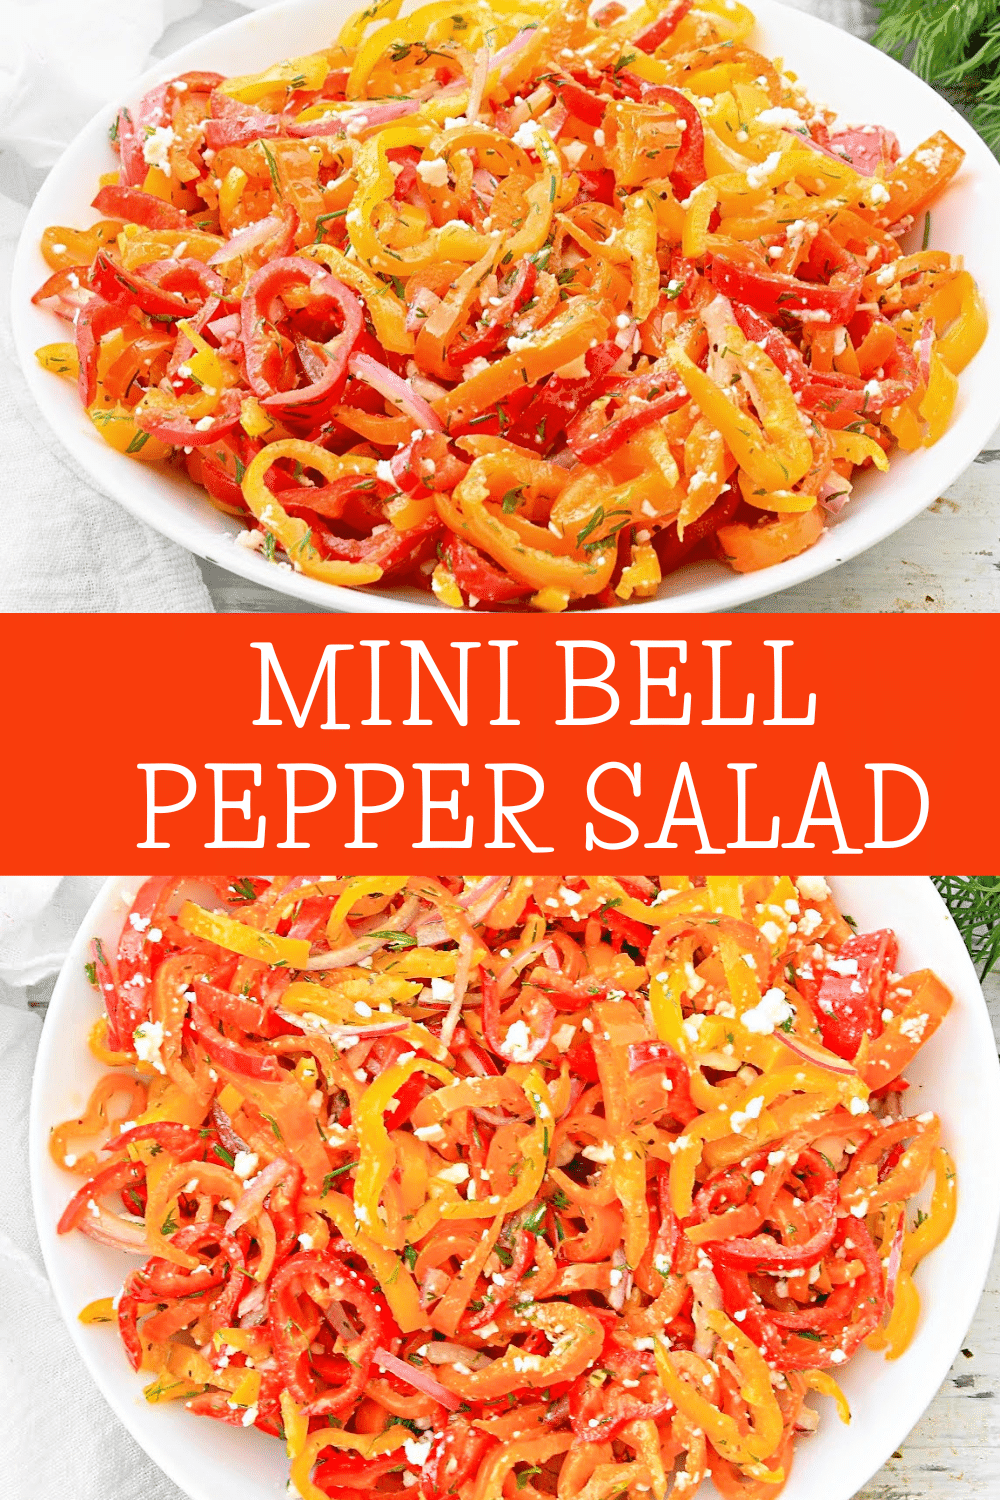 Bell Pepper Salad ~ Bright colors and fresh flavors of mini bell peppers shine in this easy make-ahead salad!  via @thiswifecooks